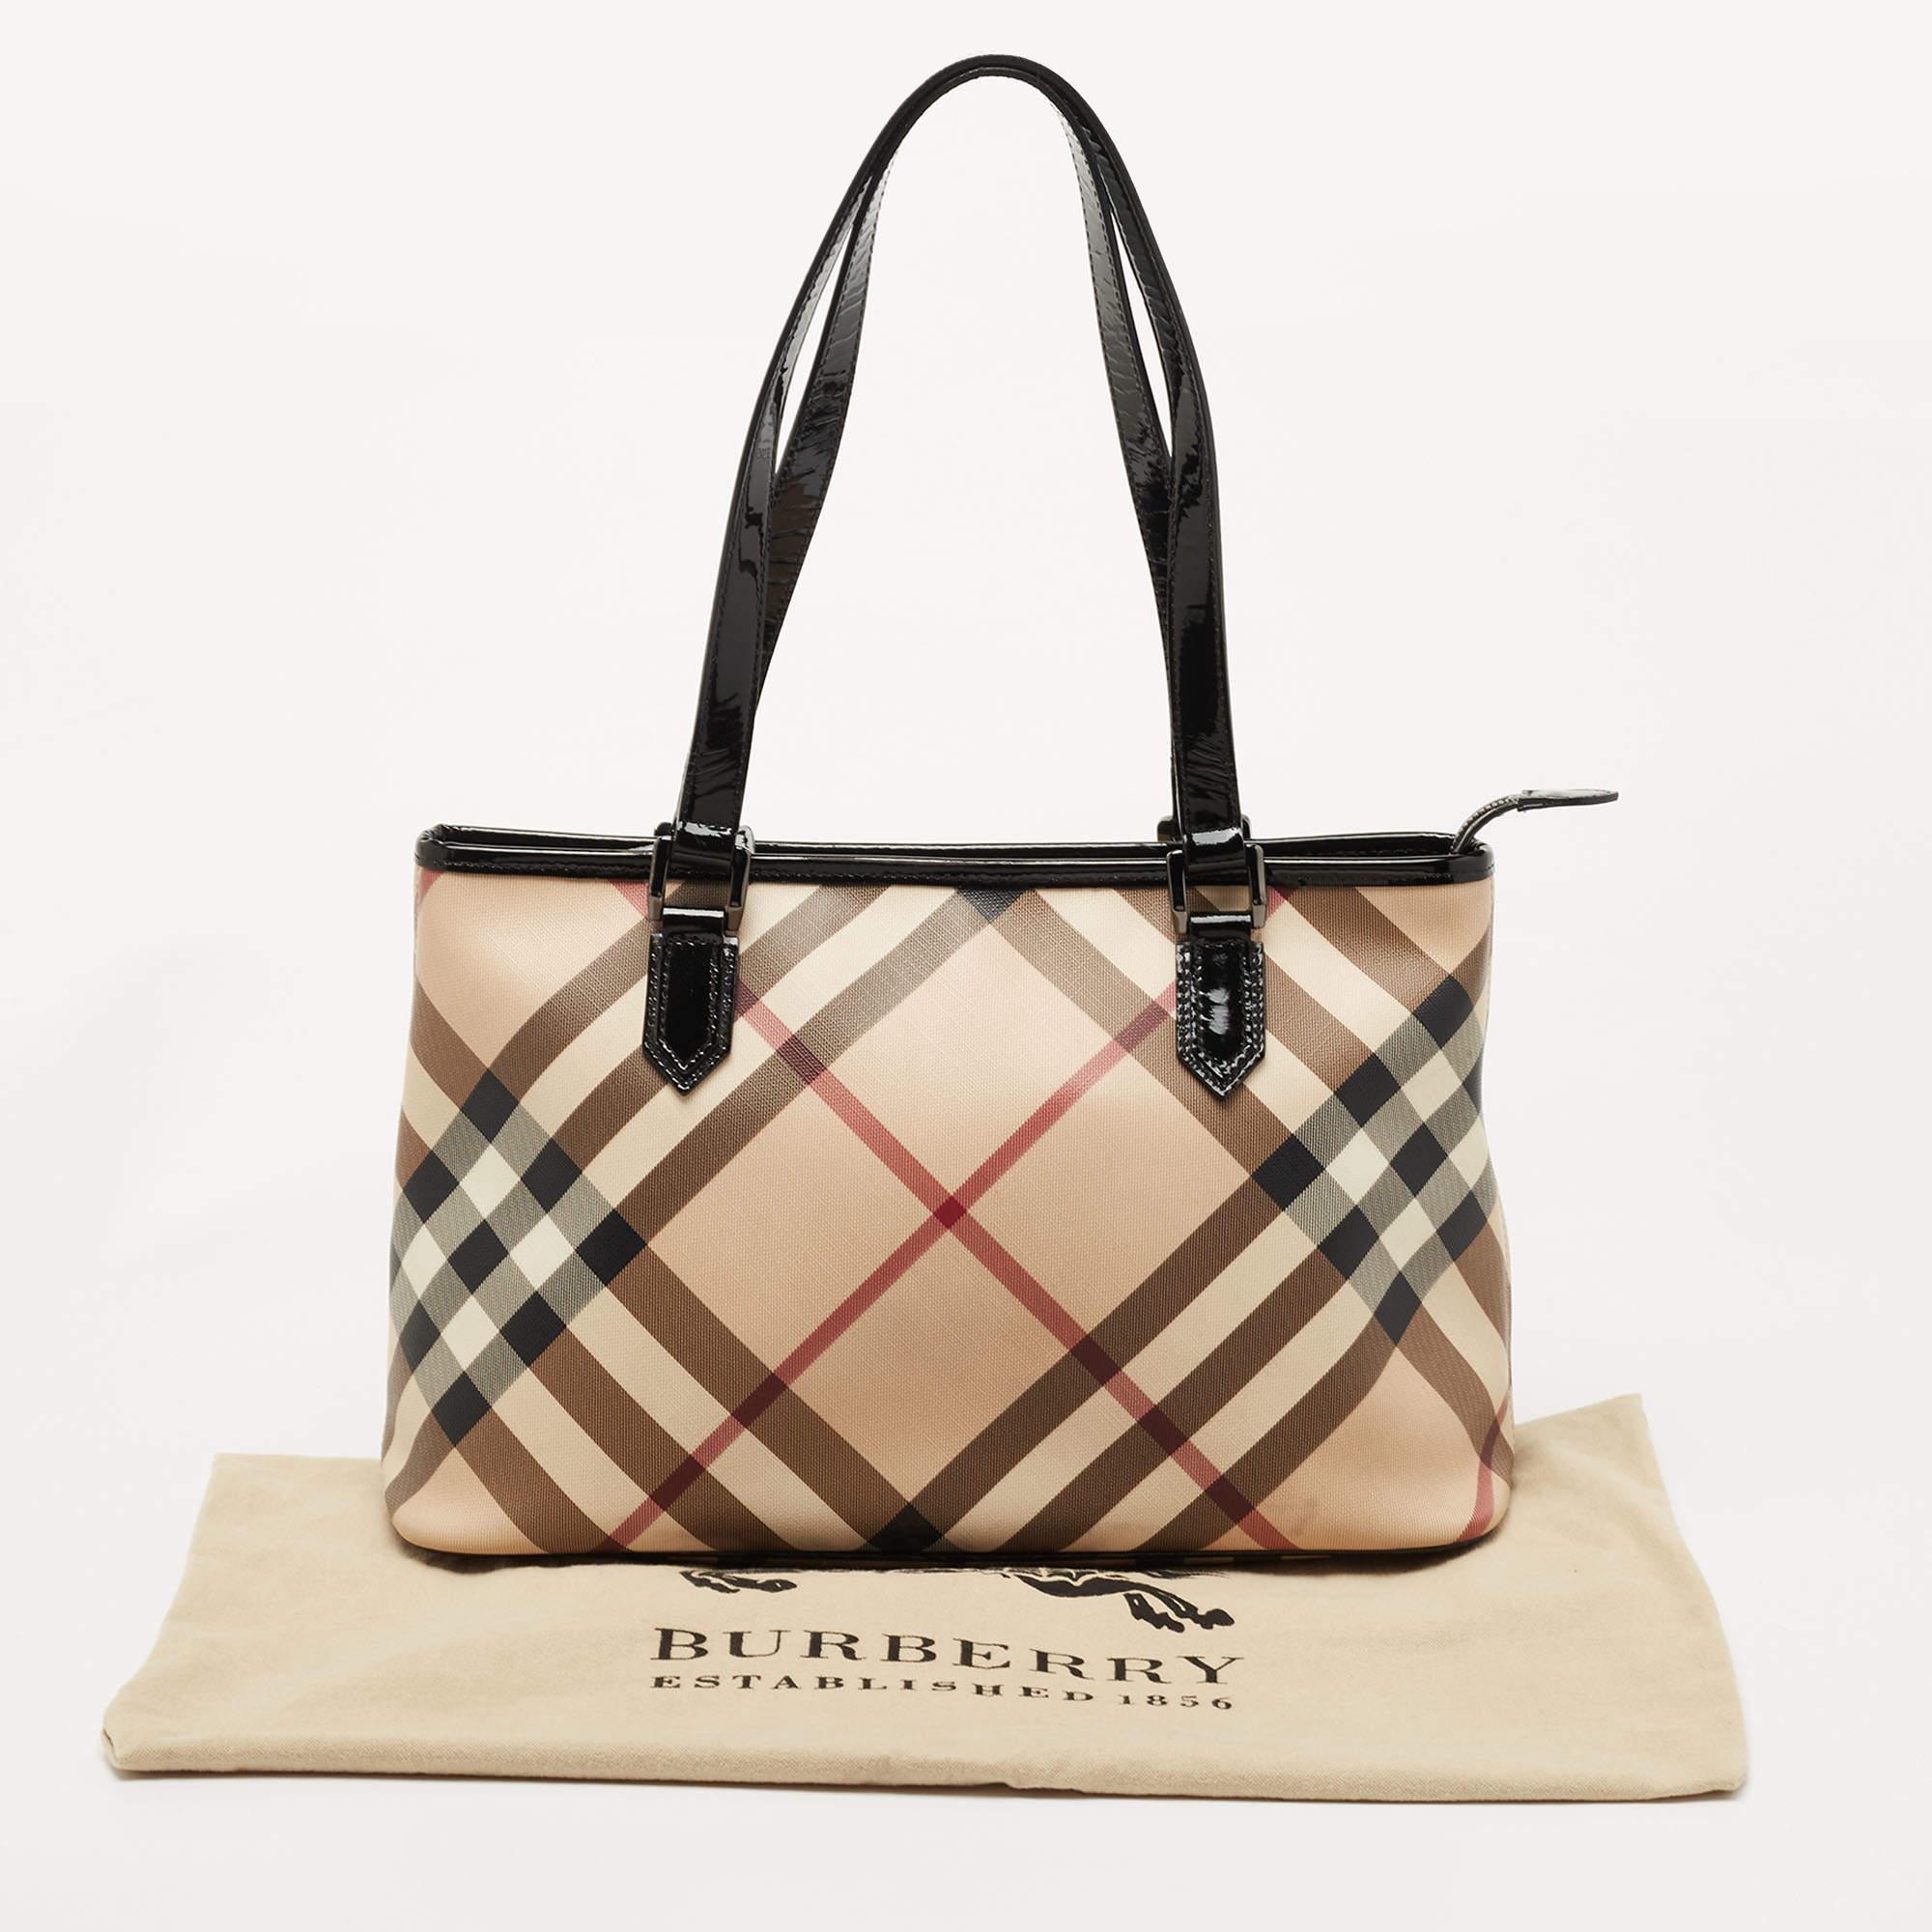 Burberry Black/Beige Nova Check Coated Canvas and Patent Leather Top Zip Tote 11